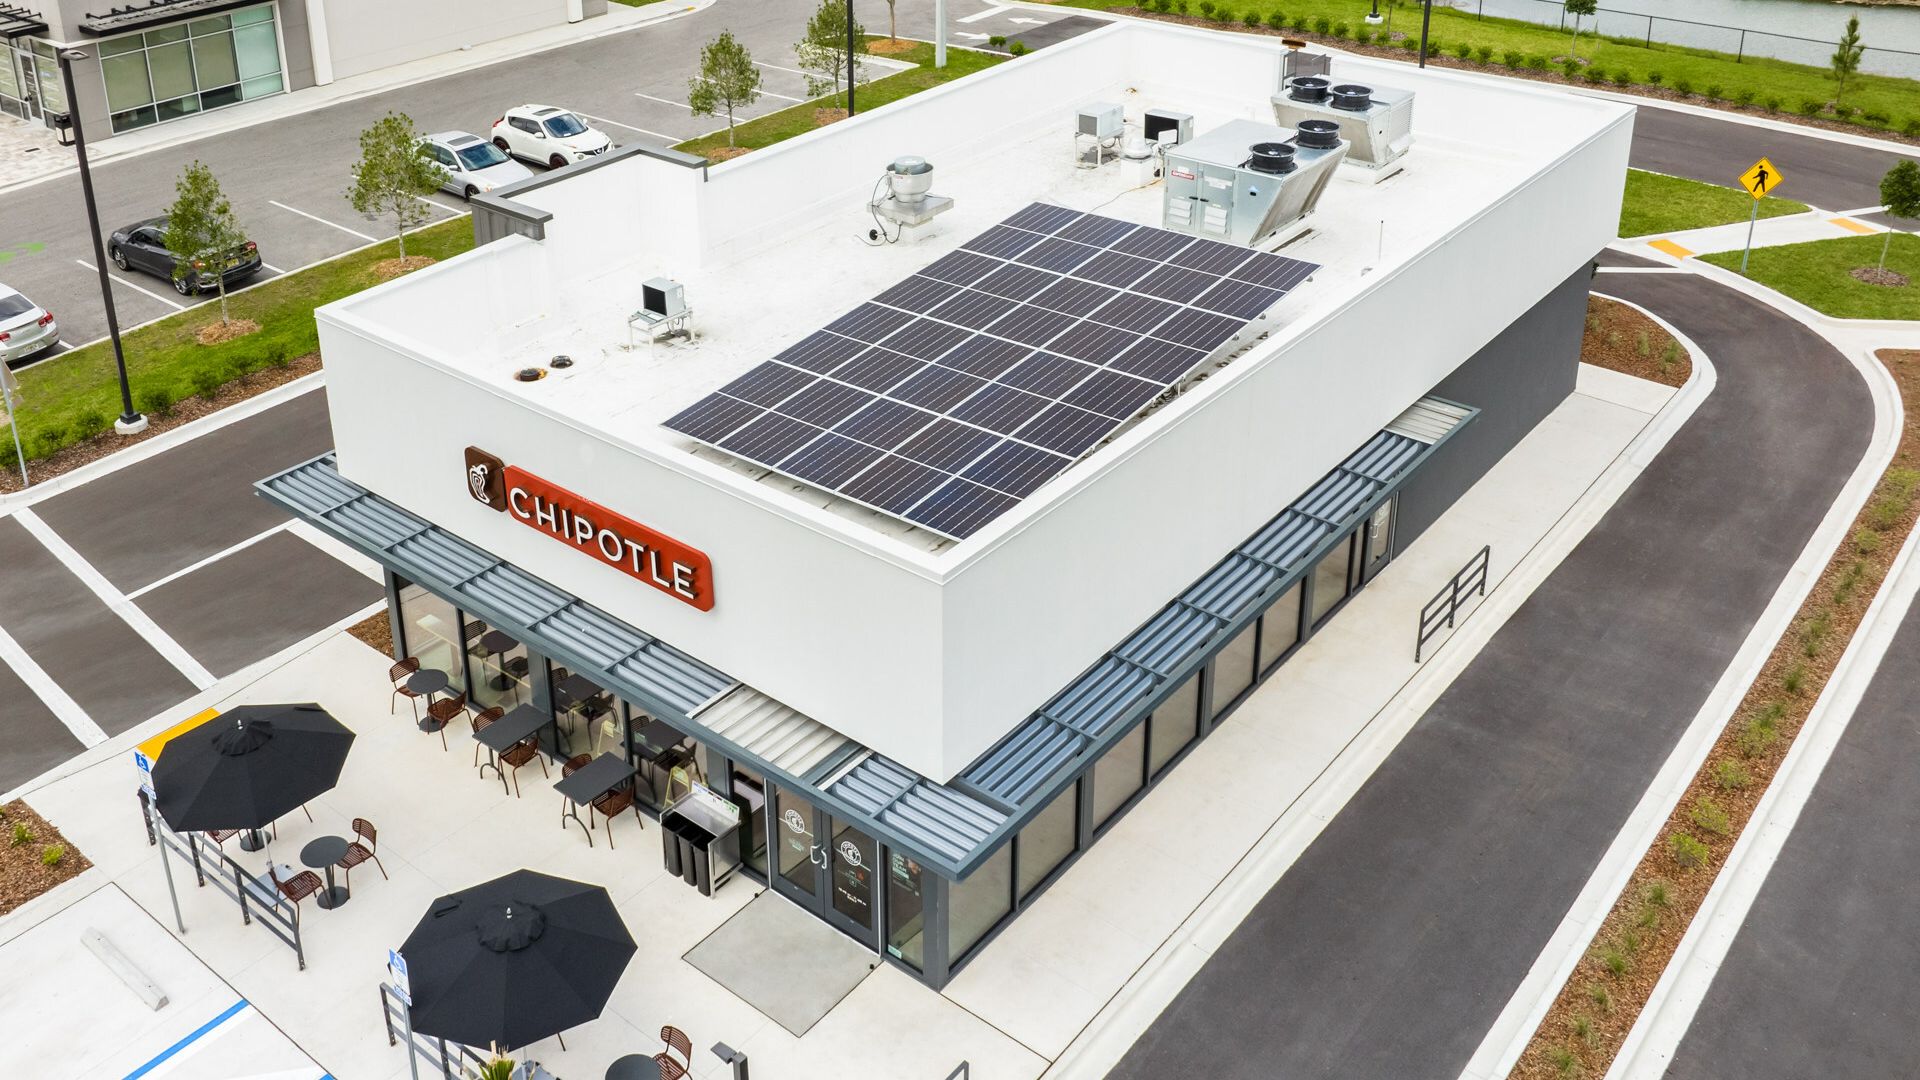 Chipotle restaurant location with solar panels on roof